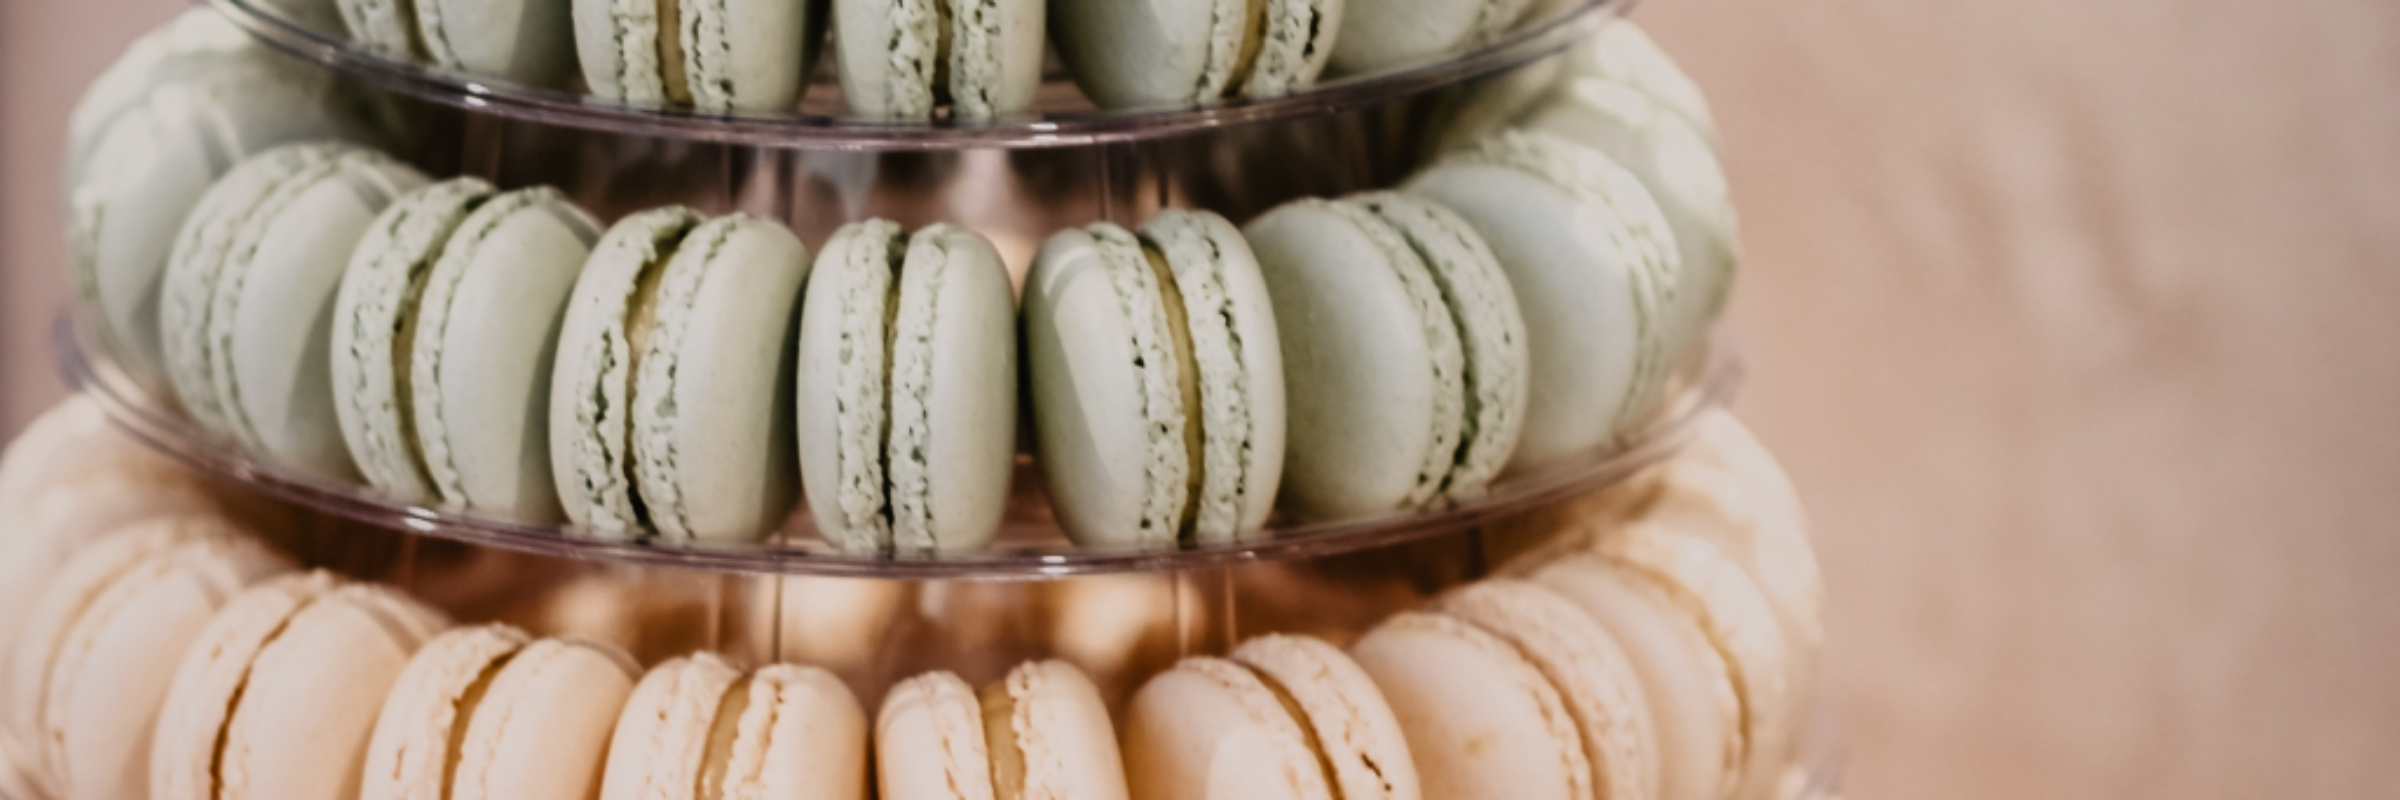 Slider-example-1-macarons-only